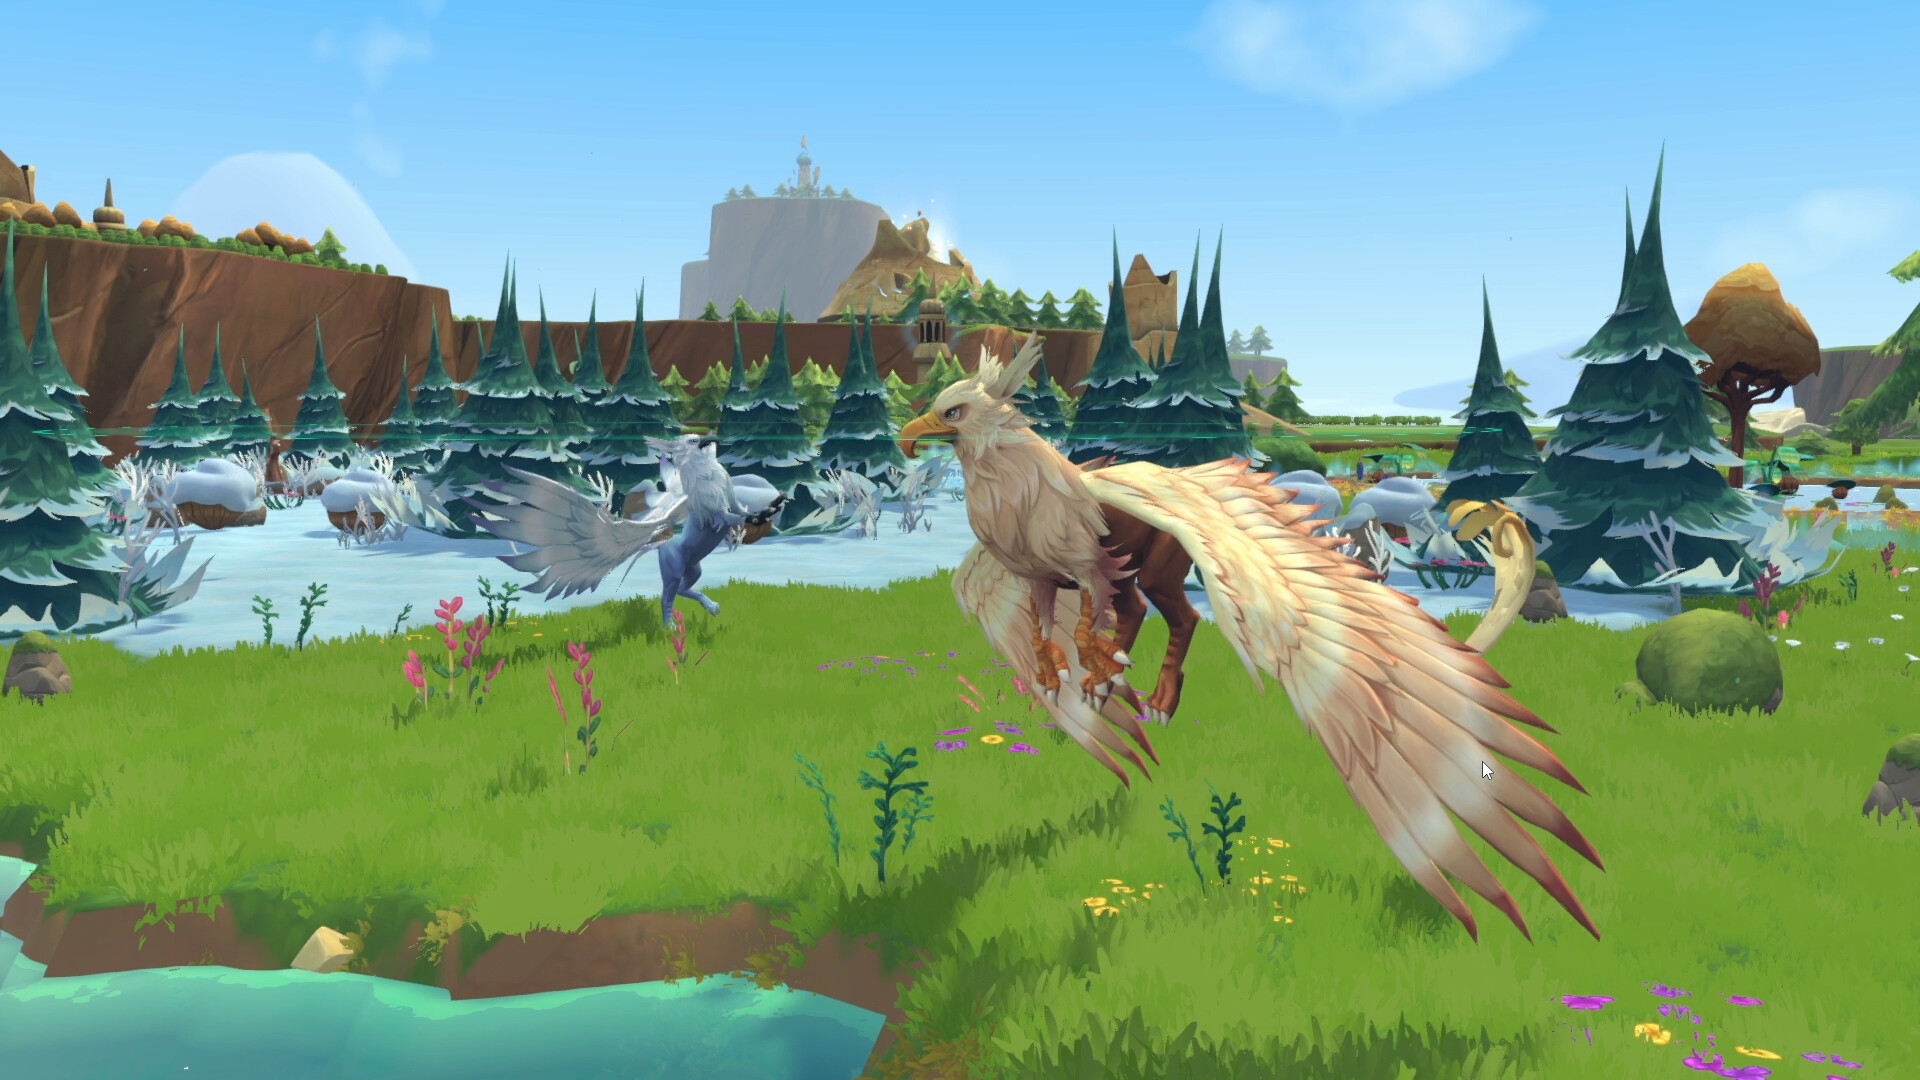 Zoo Tycoon meets fantasy dinosaurs is the best game pitch I've heard all  year - and the game looks swell too